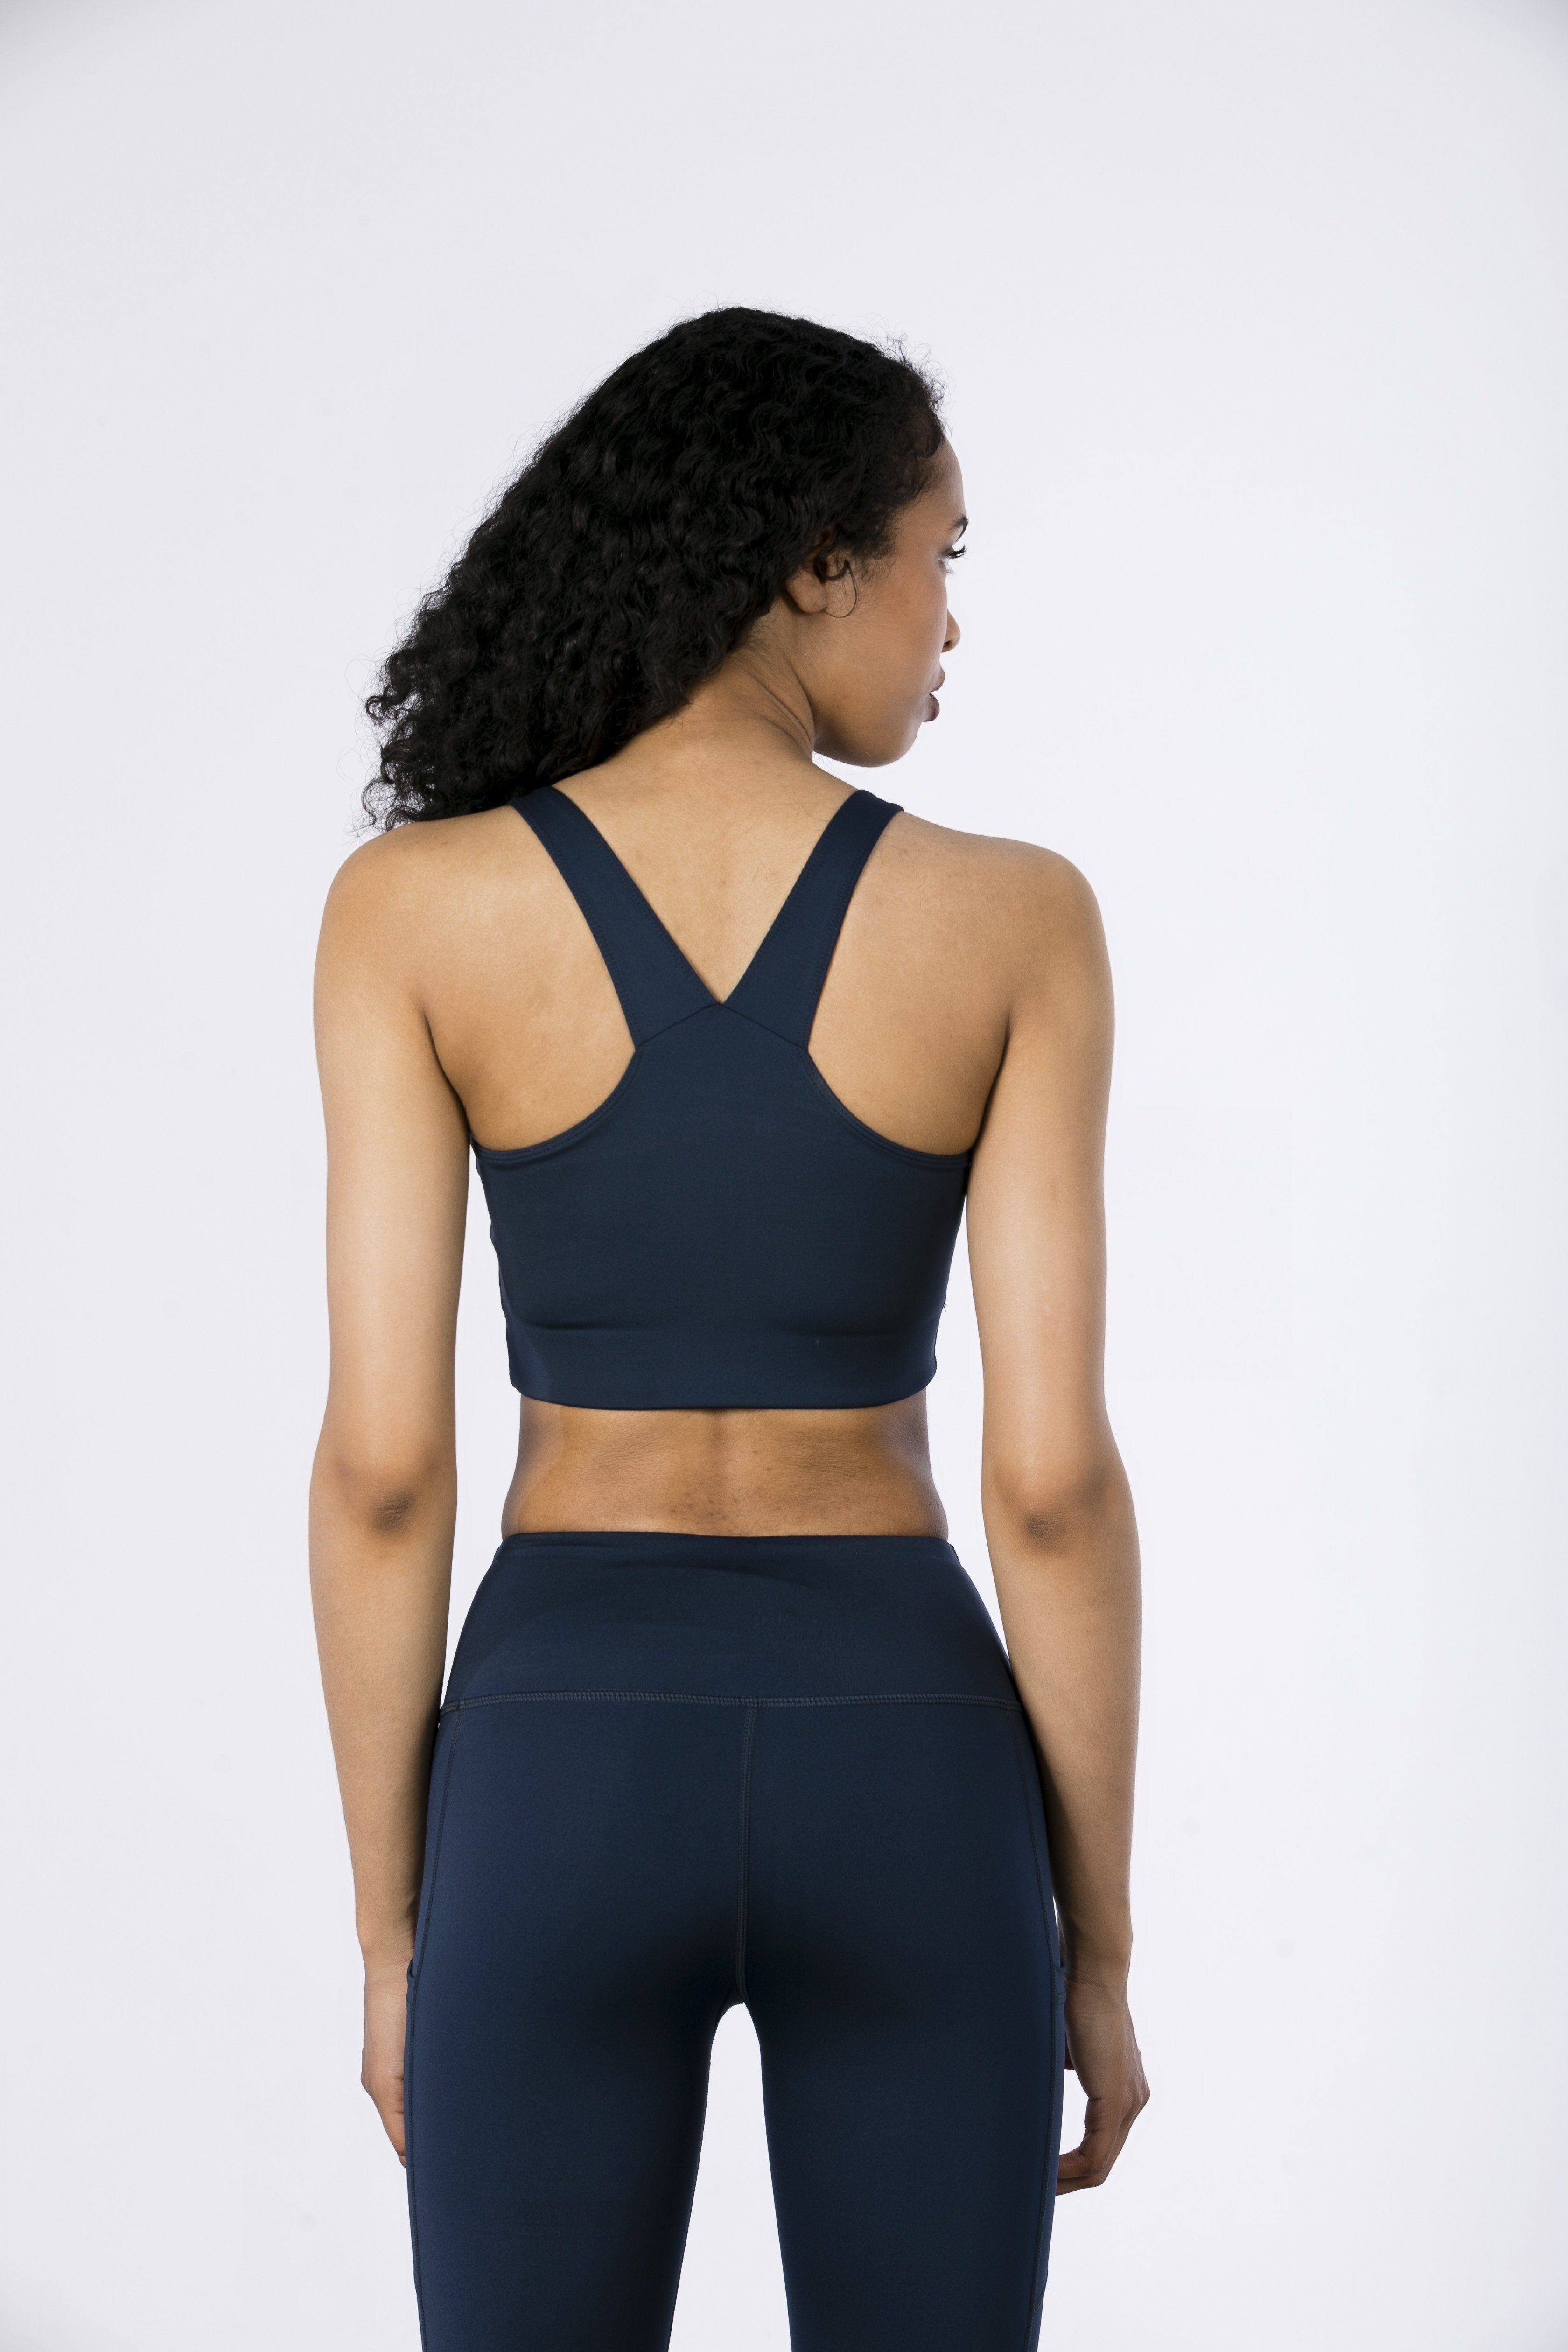 Trendy and Bendy high performing leggings in navy provide figure shaping support, with high-waisted compression & cellulite control. Designed for yoga, pilates, running, high & low intensity workouts, they are 100% squat proof.